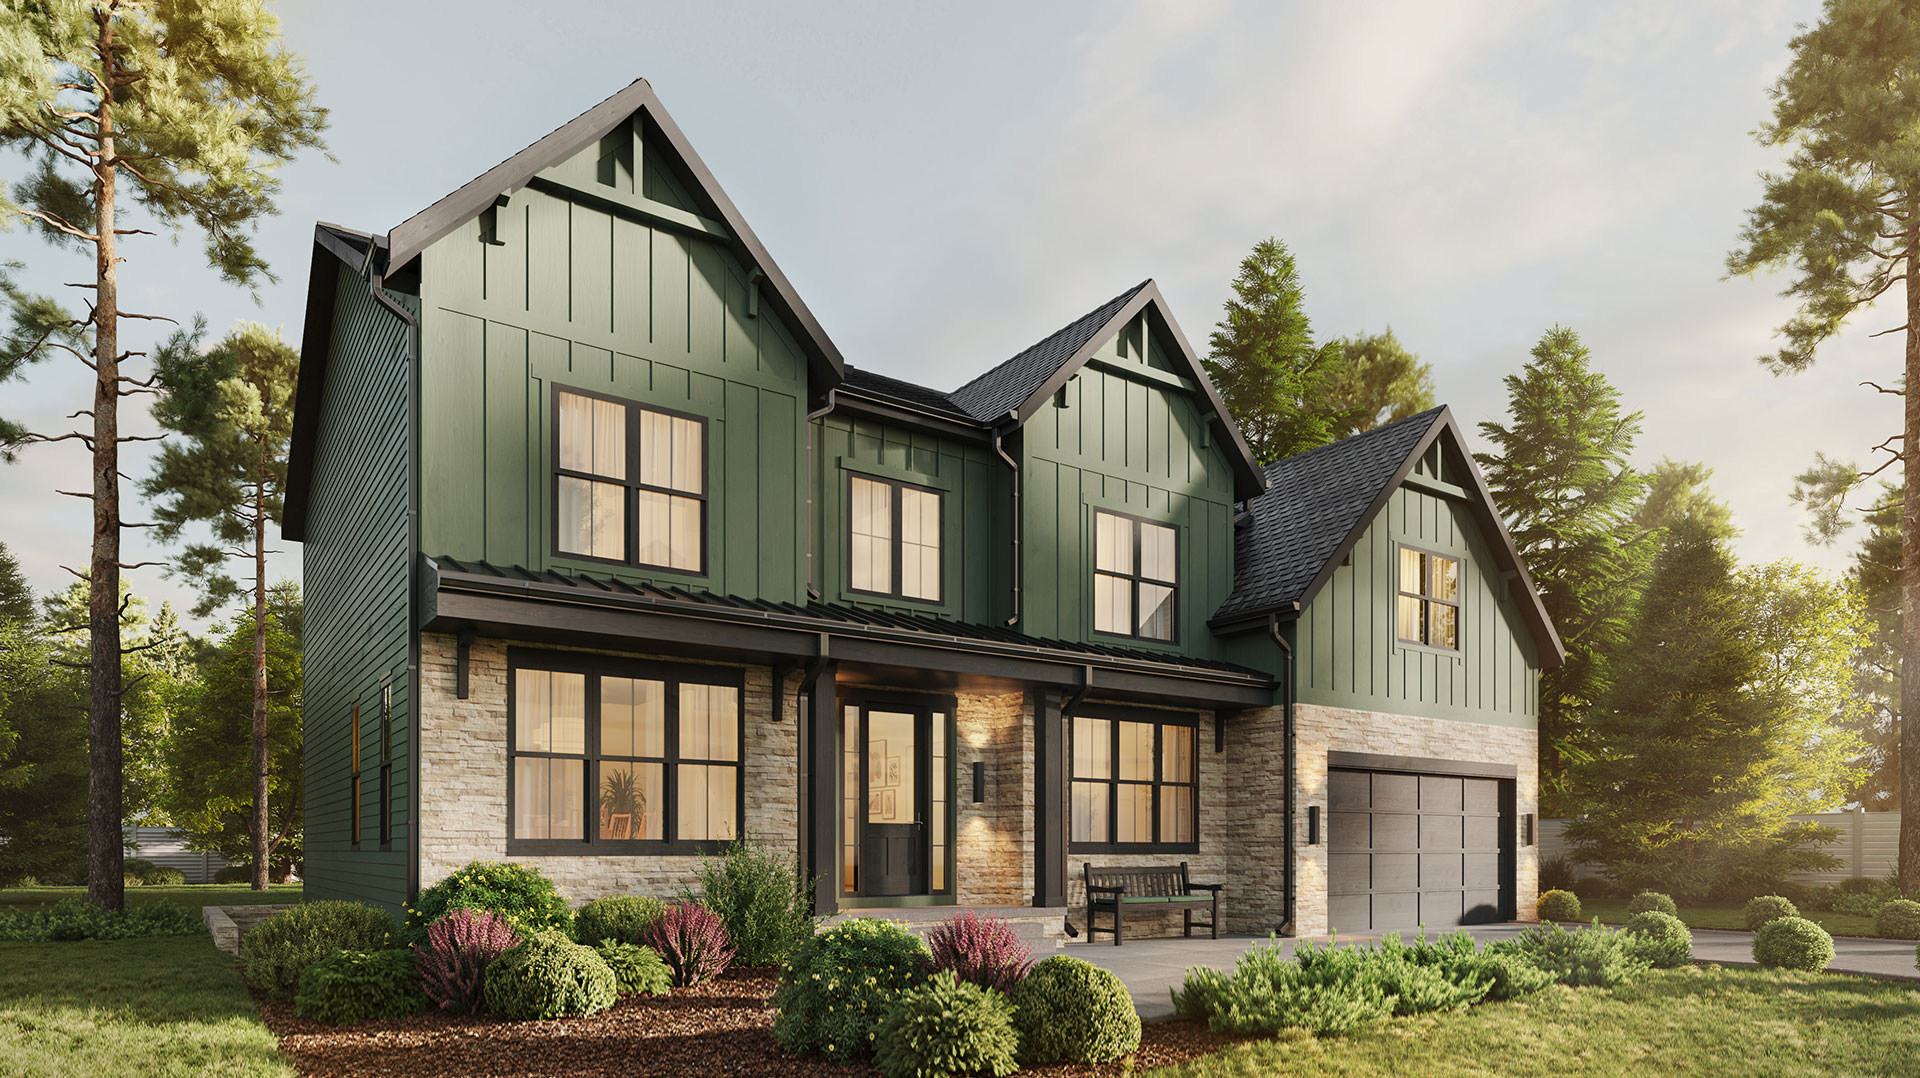 A modern farmhouse with green board and batten, dark brown windows and trim, and ledge stone.